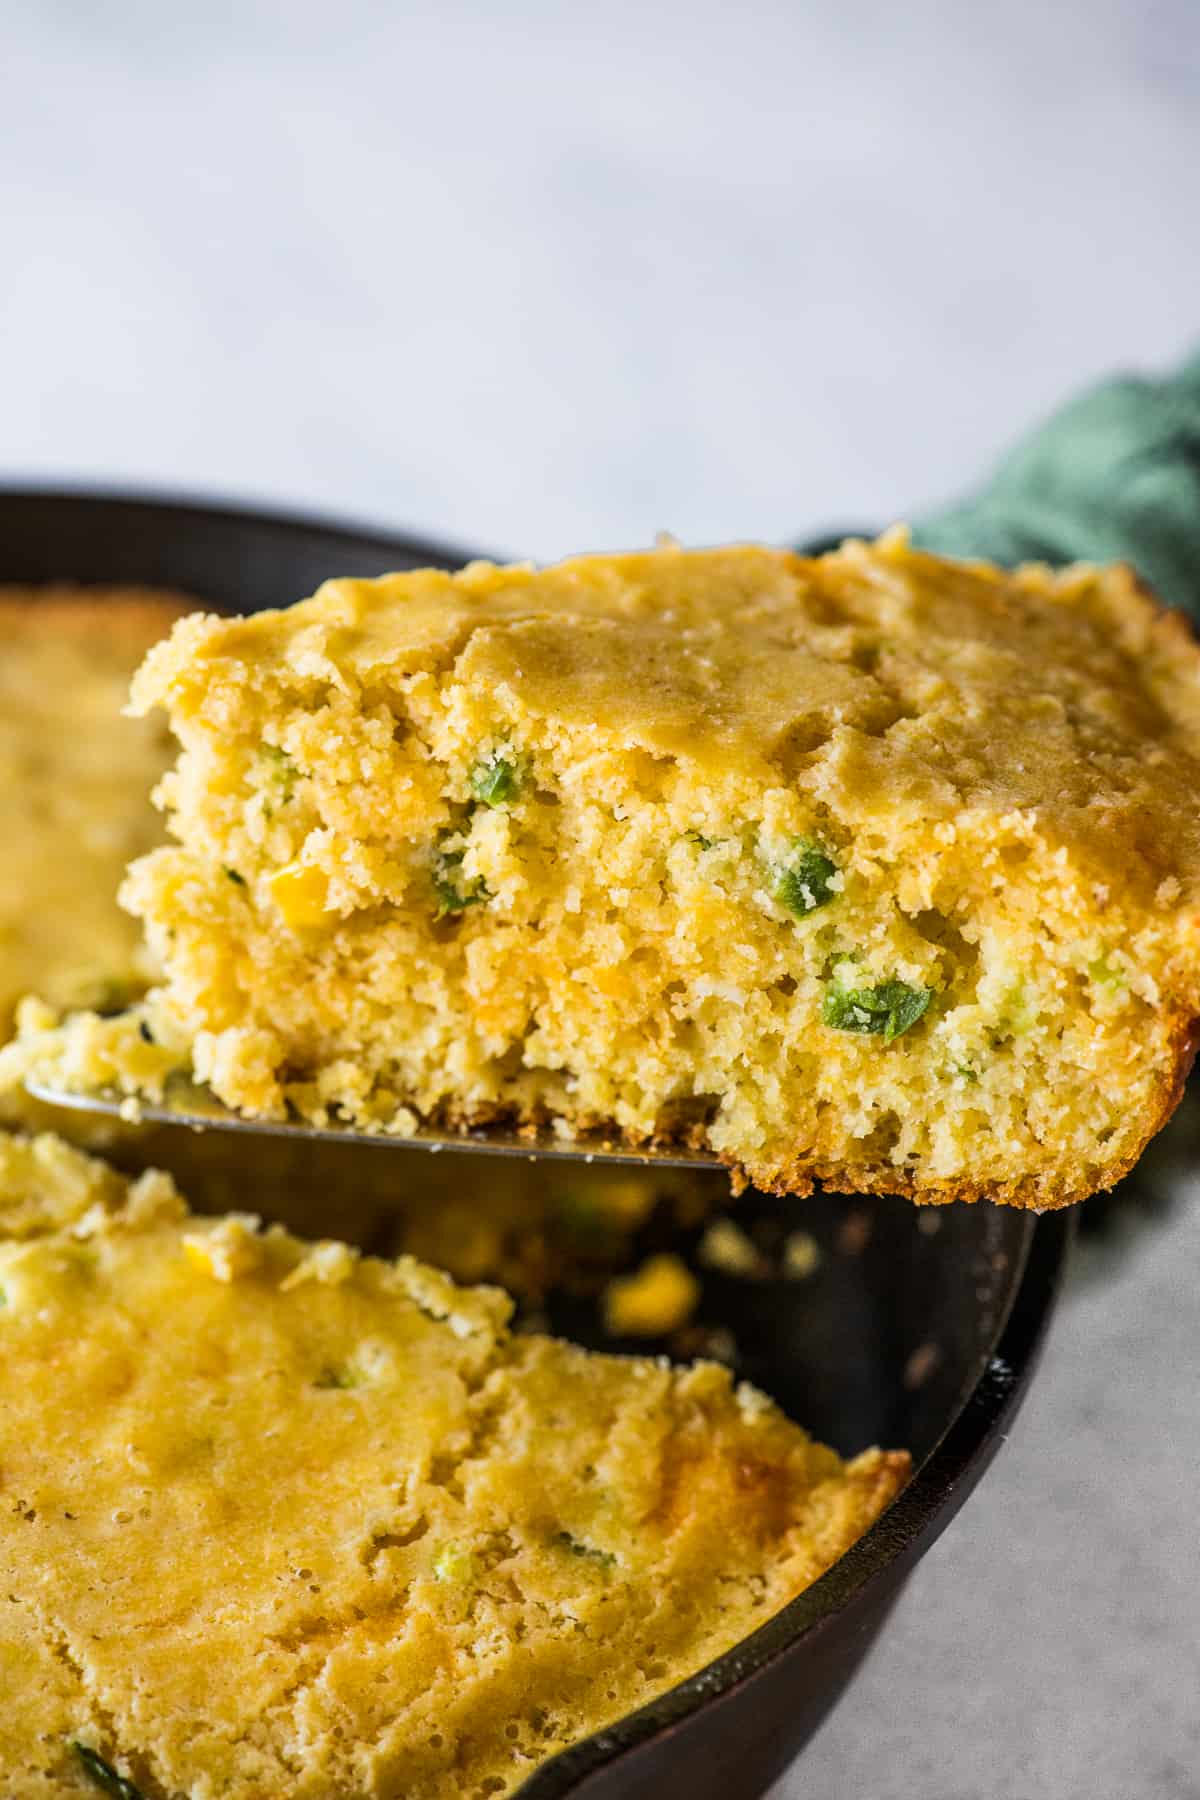 A slice of crumbly jalapeño cornbread with pieces of jalapeños and melted cheddar cheese.